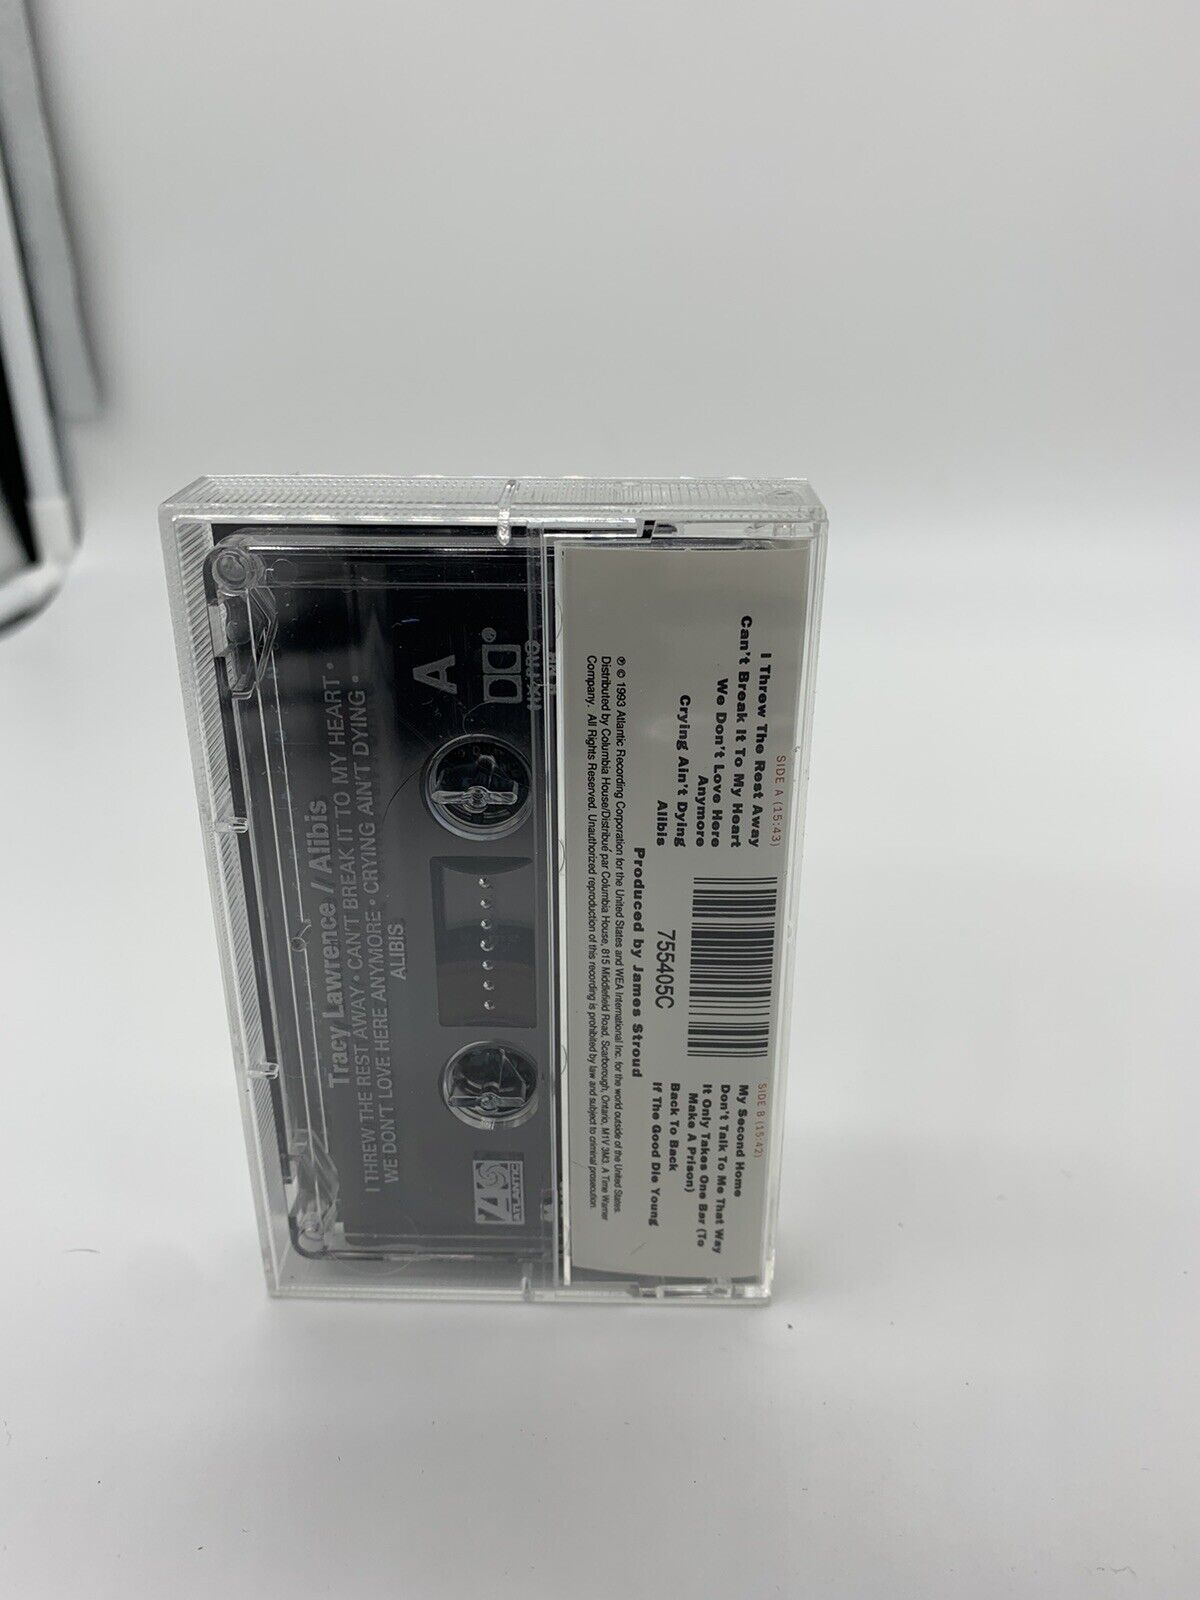 Tracy Lawrence Alibis Cassette